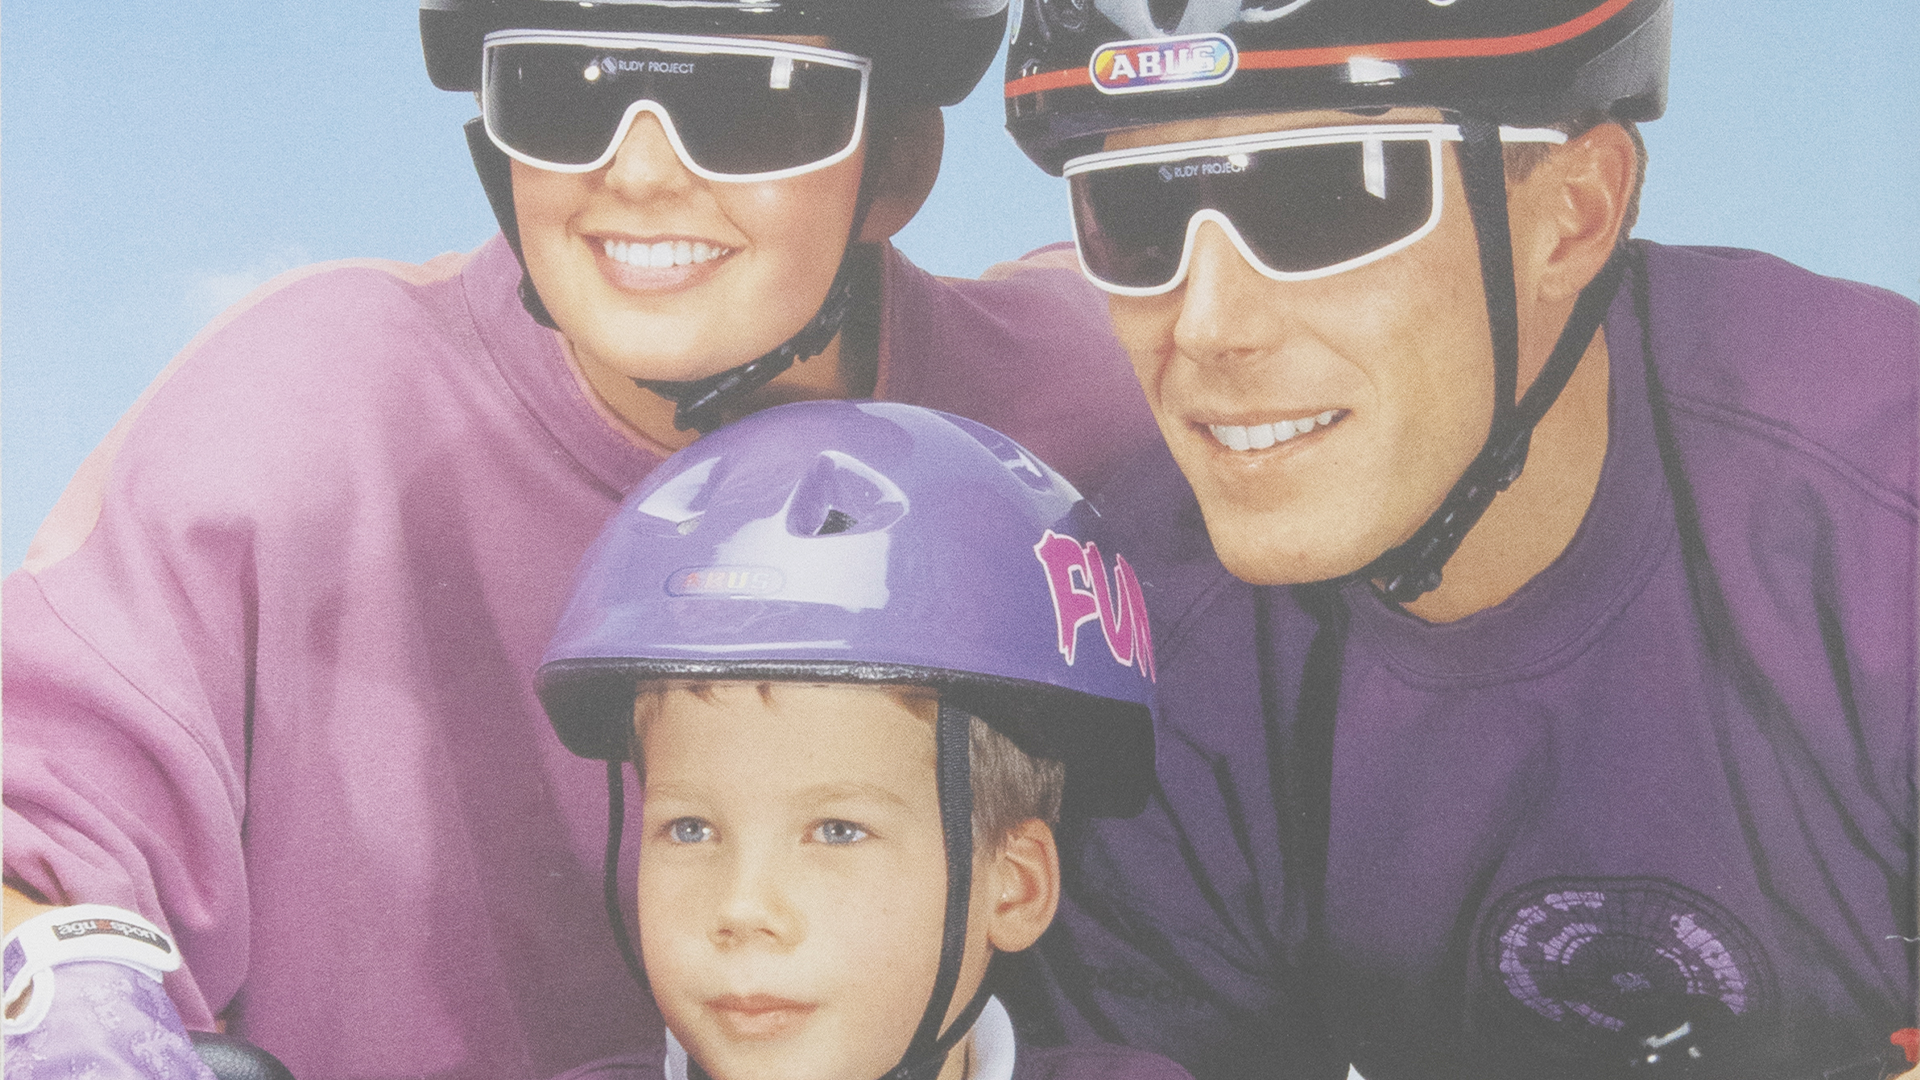 A man and two children with ABUS bike helmets © ABUS